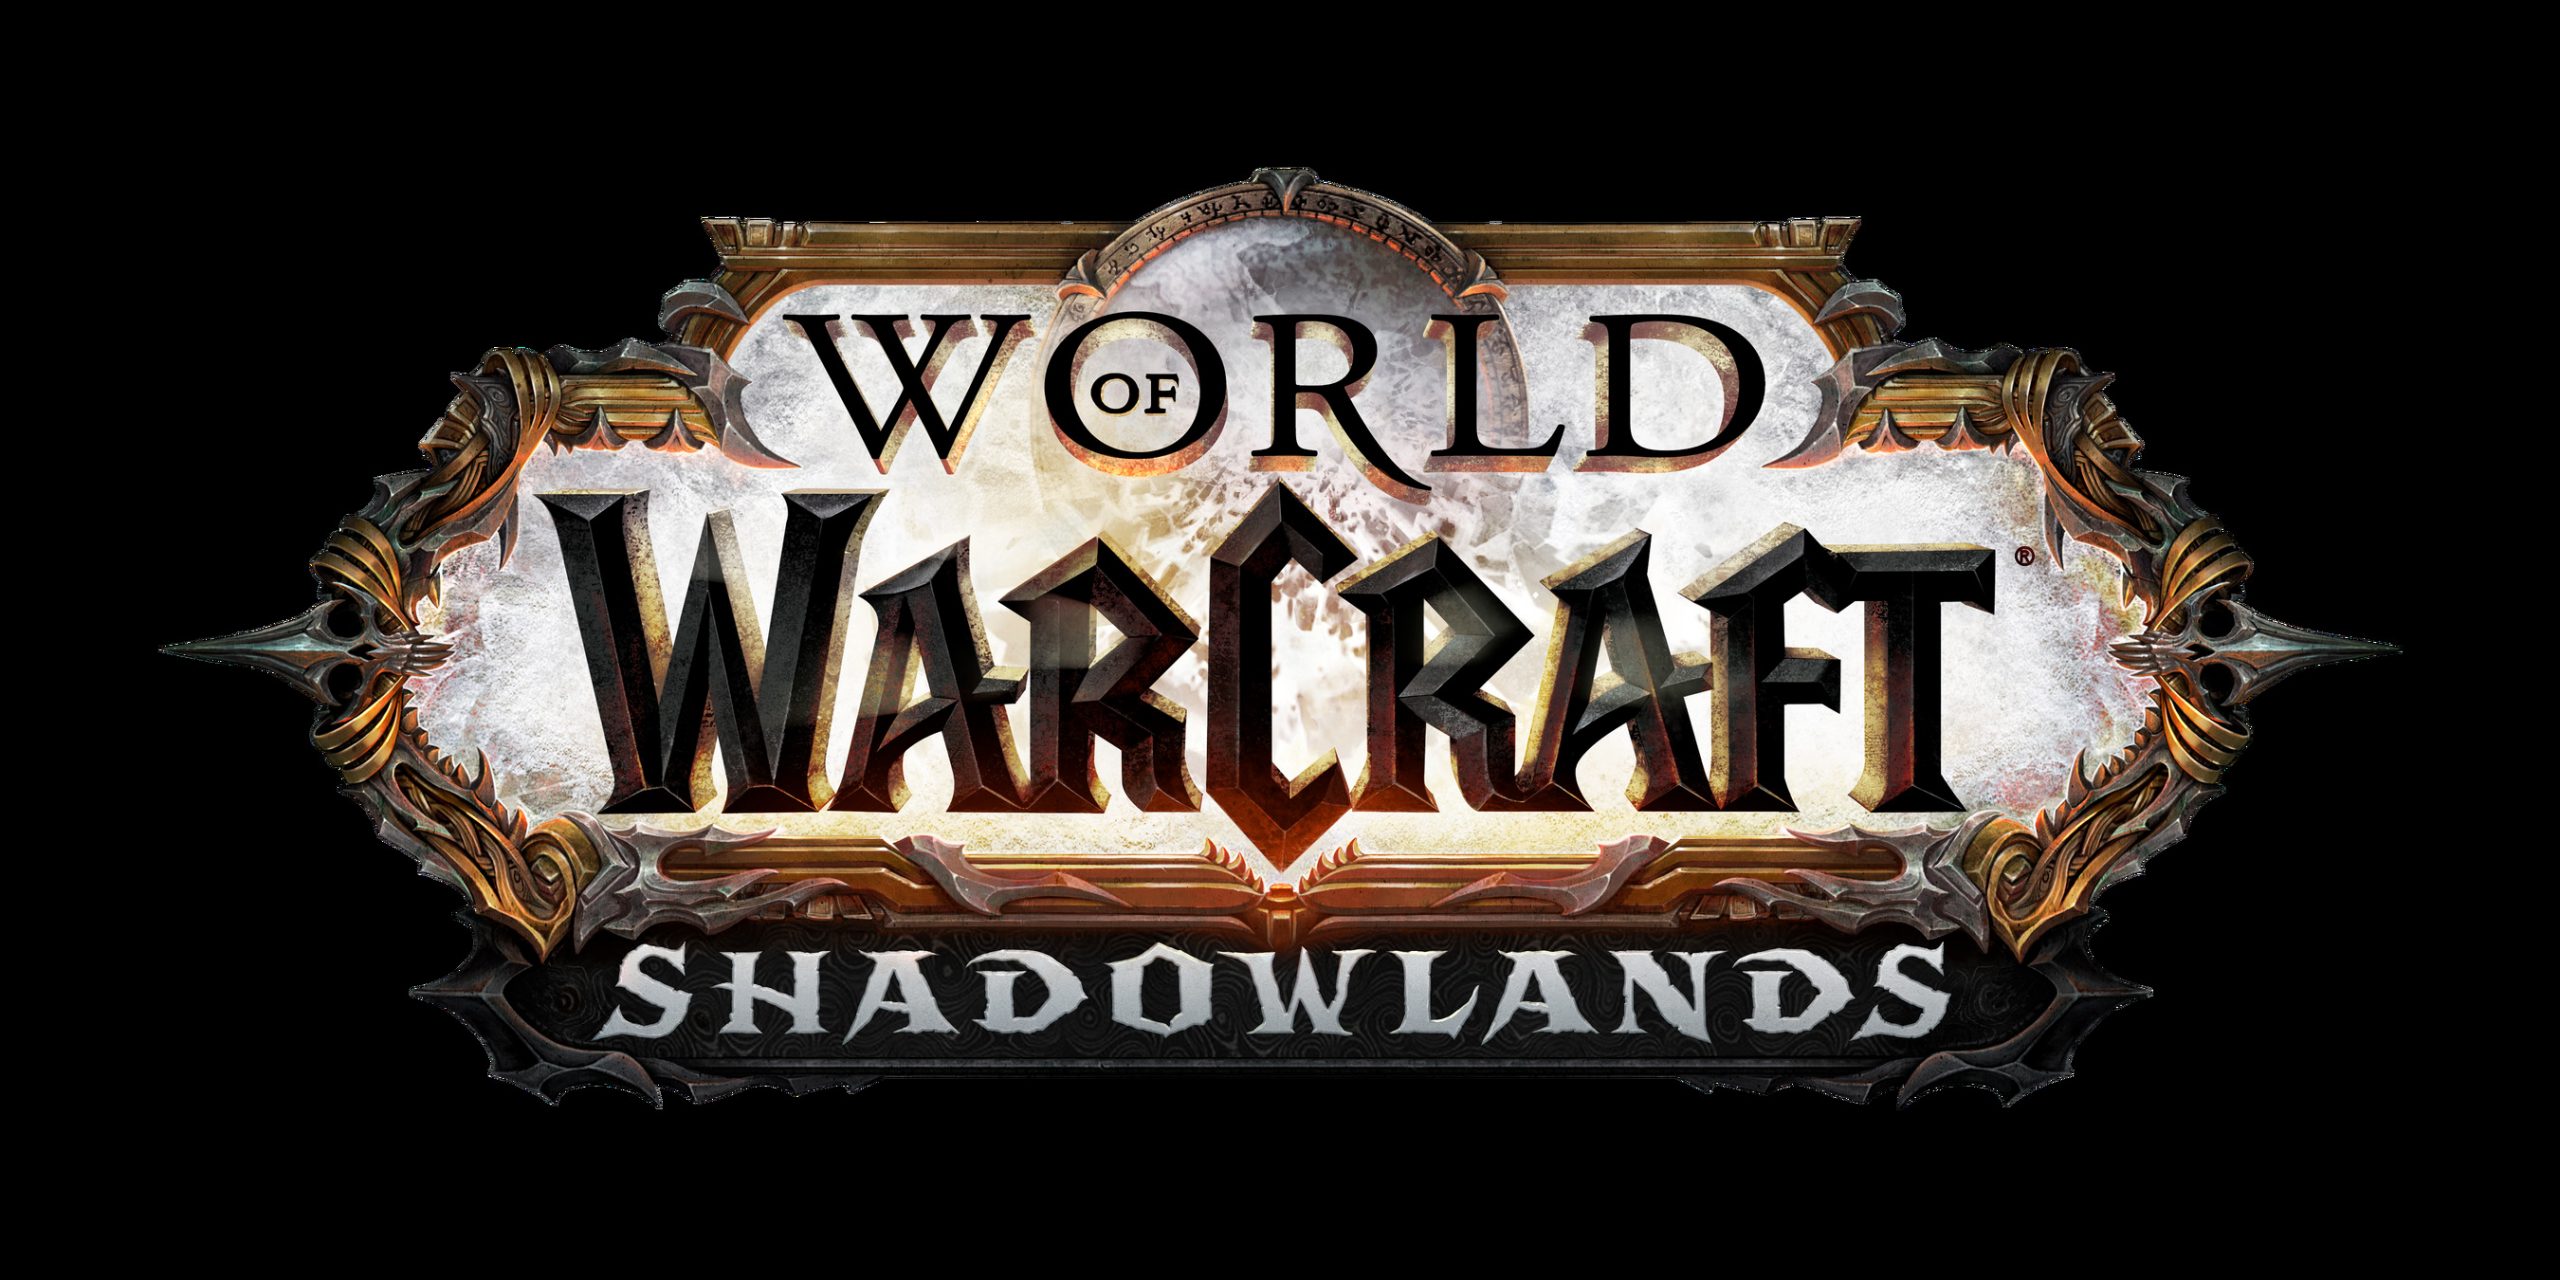 World of Warcraft: Shadowlands Delayed, No New Date Given